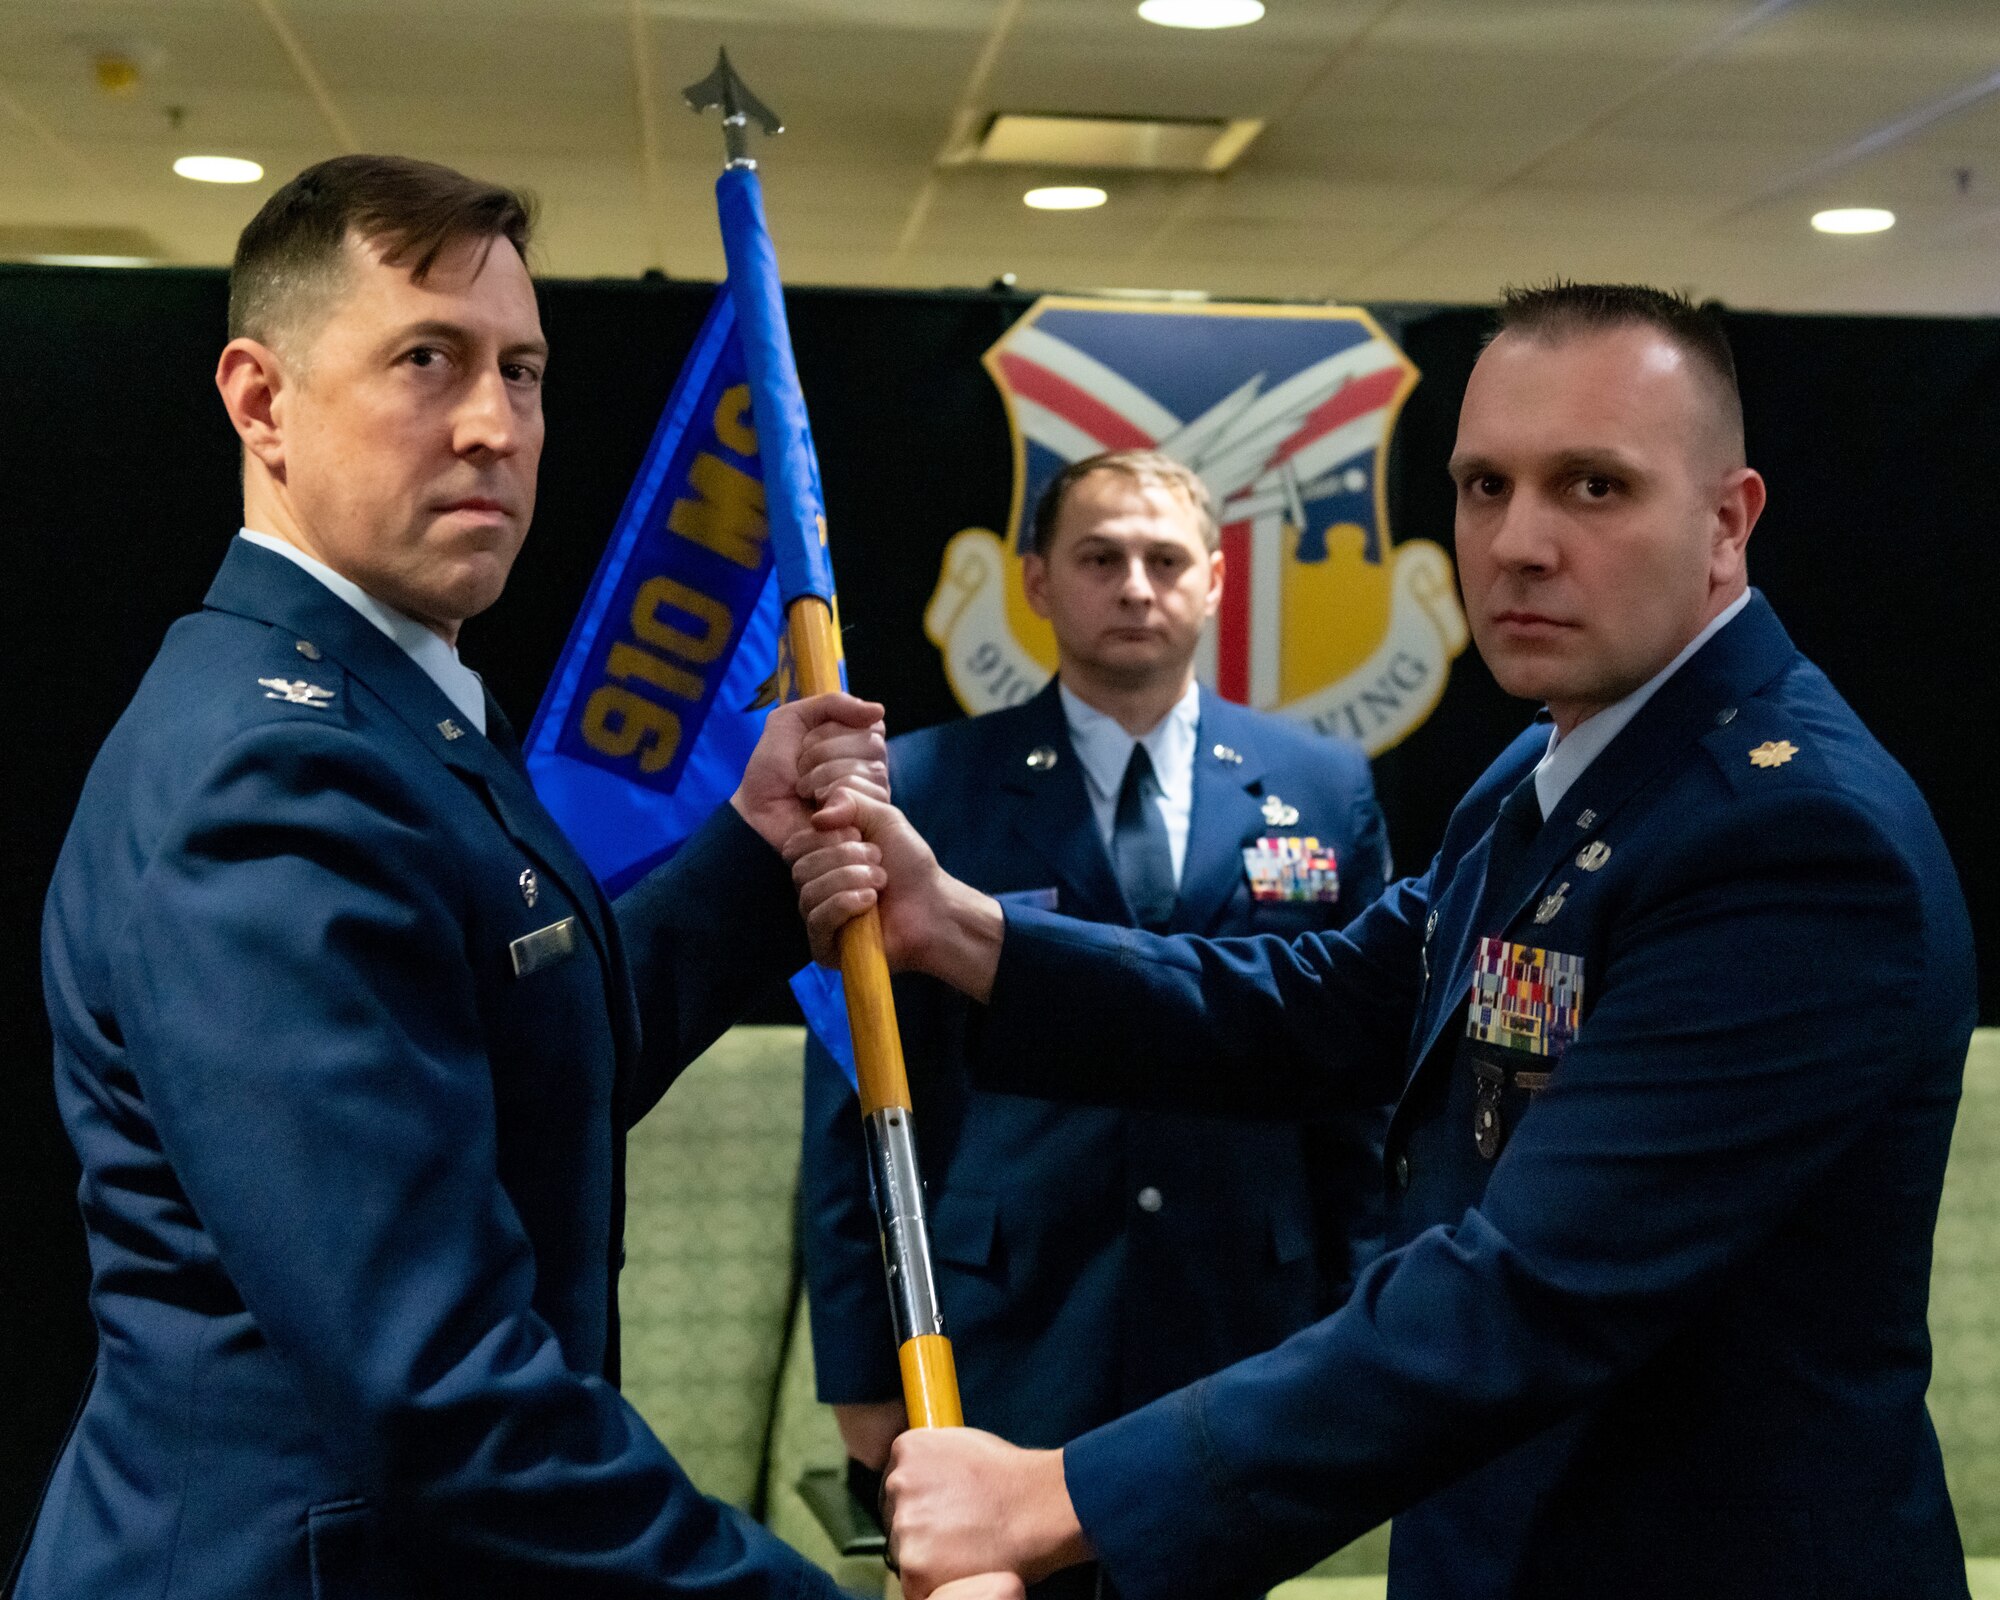 Maj. Nicholas Megyesi, the outgoing commander of the 910th Security Forces Squadron, relinquishes command to Col. Gregory Meyer, commander of the 910th Mission Support Group, Feb. 4, 2023, at the unit’s change of command ceremony at Youngstown Air Reserve Station, Ohio.